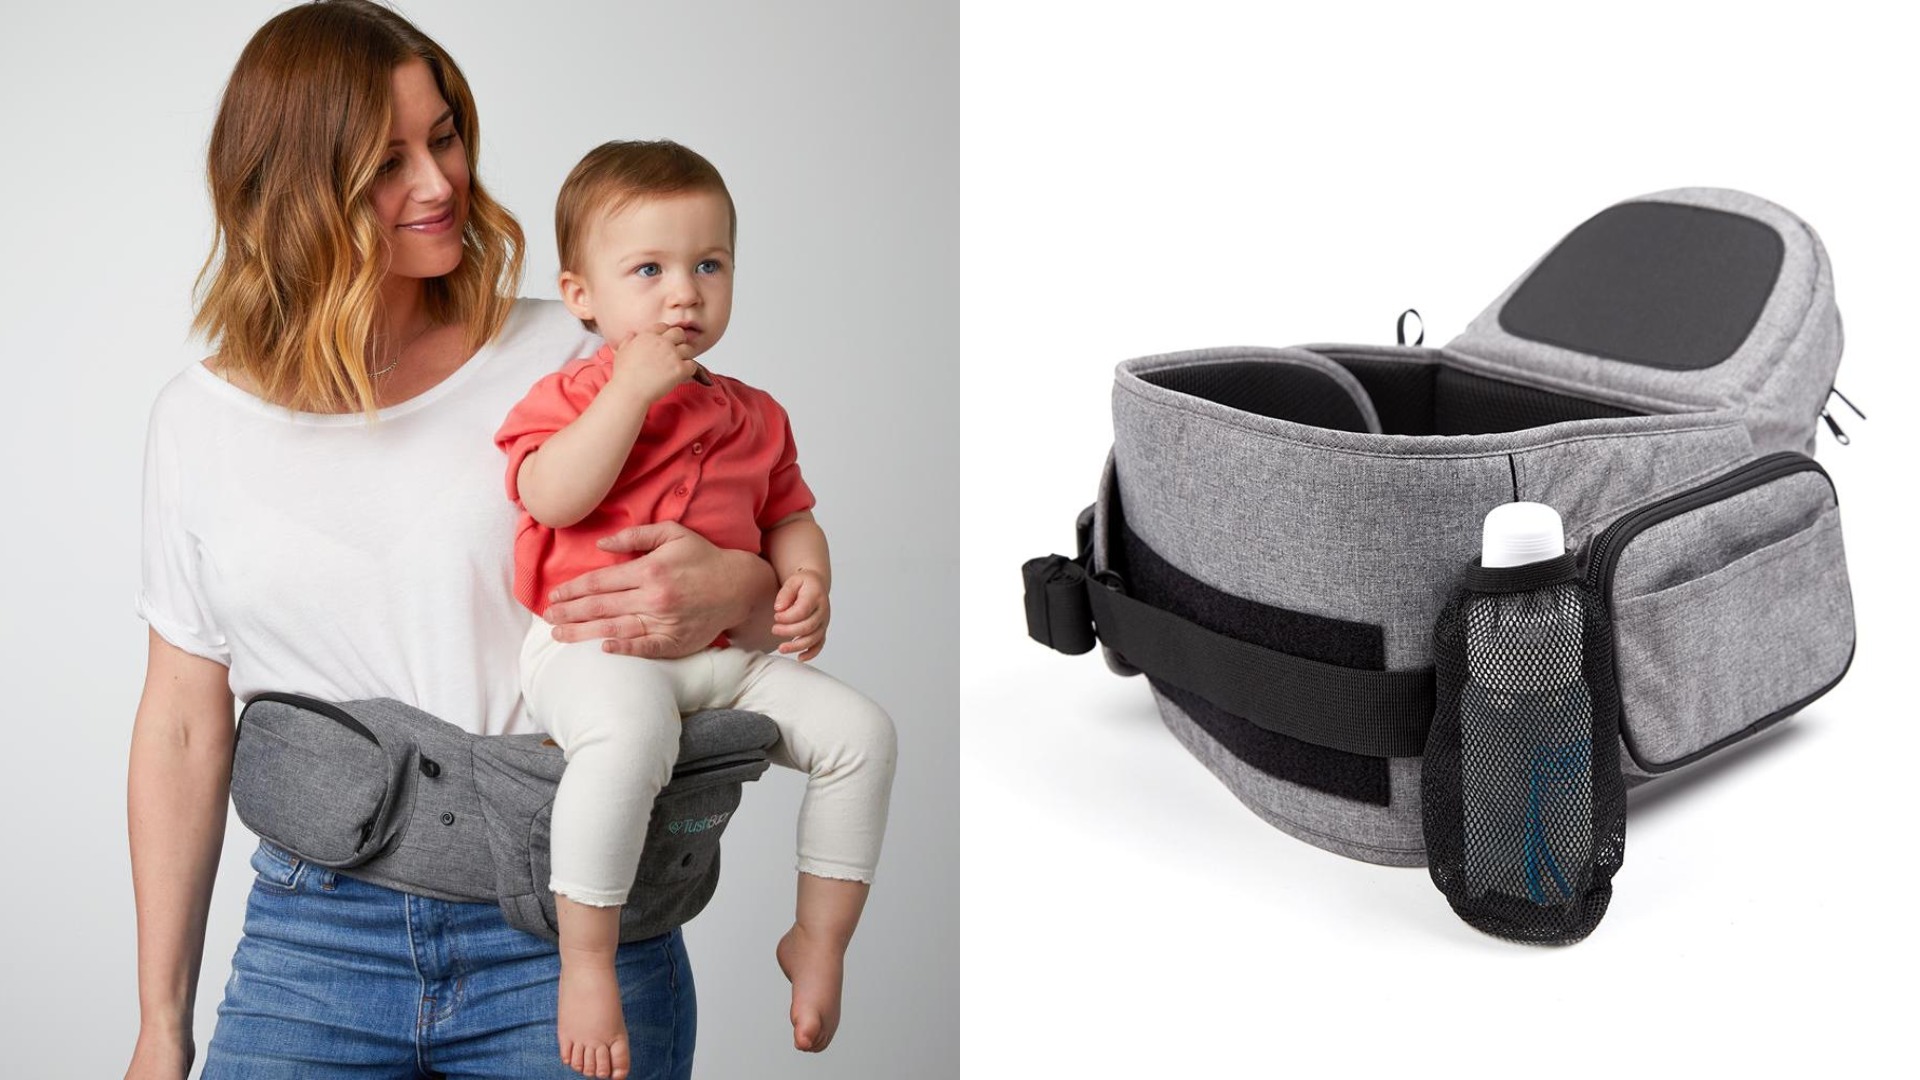 Tushbaby Baby Carrier Review